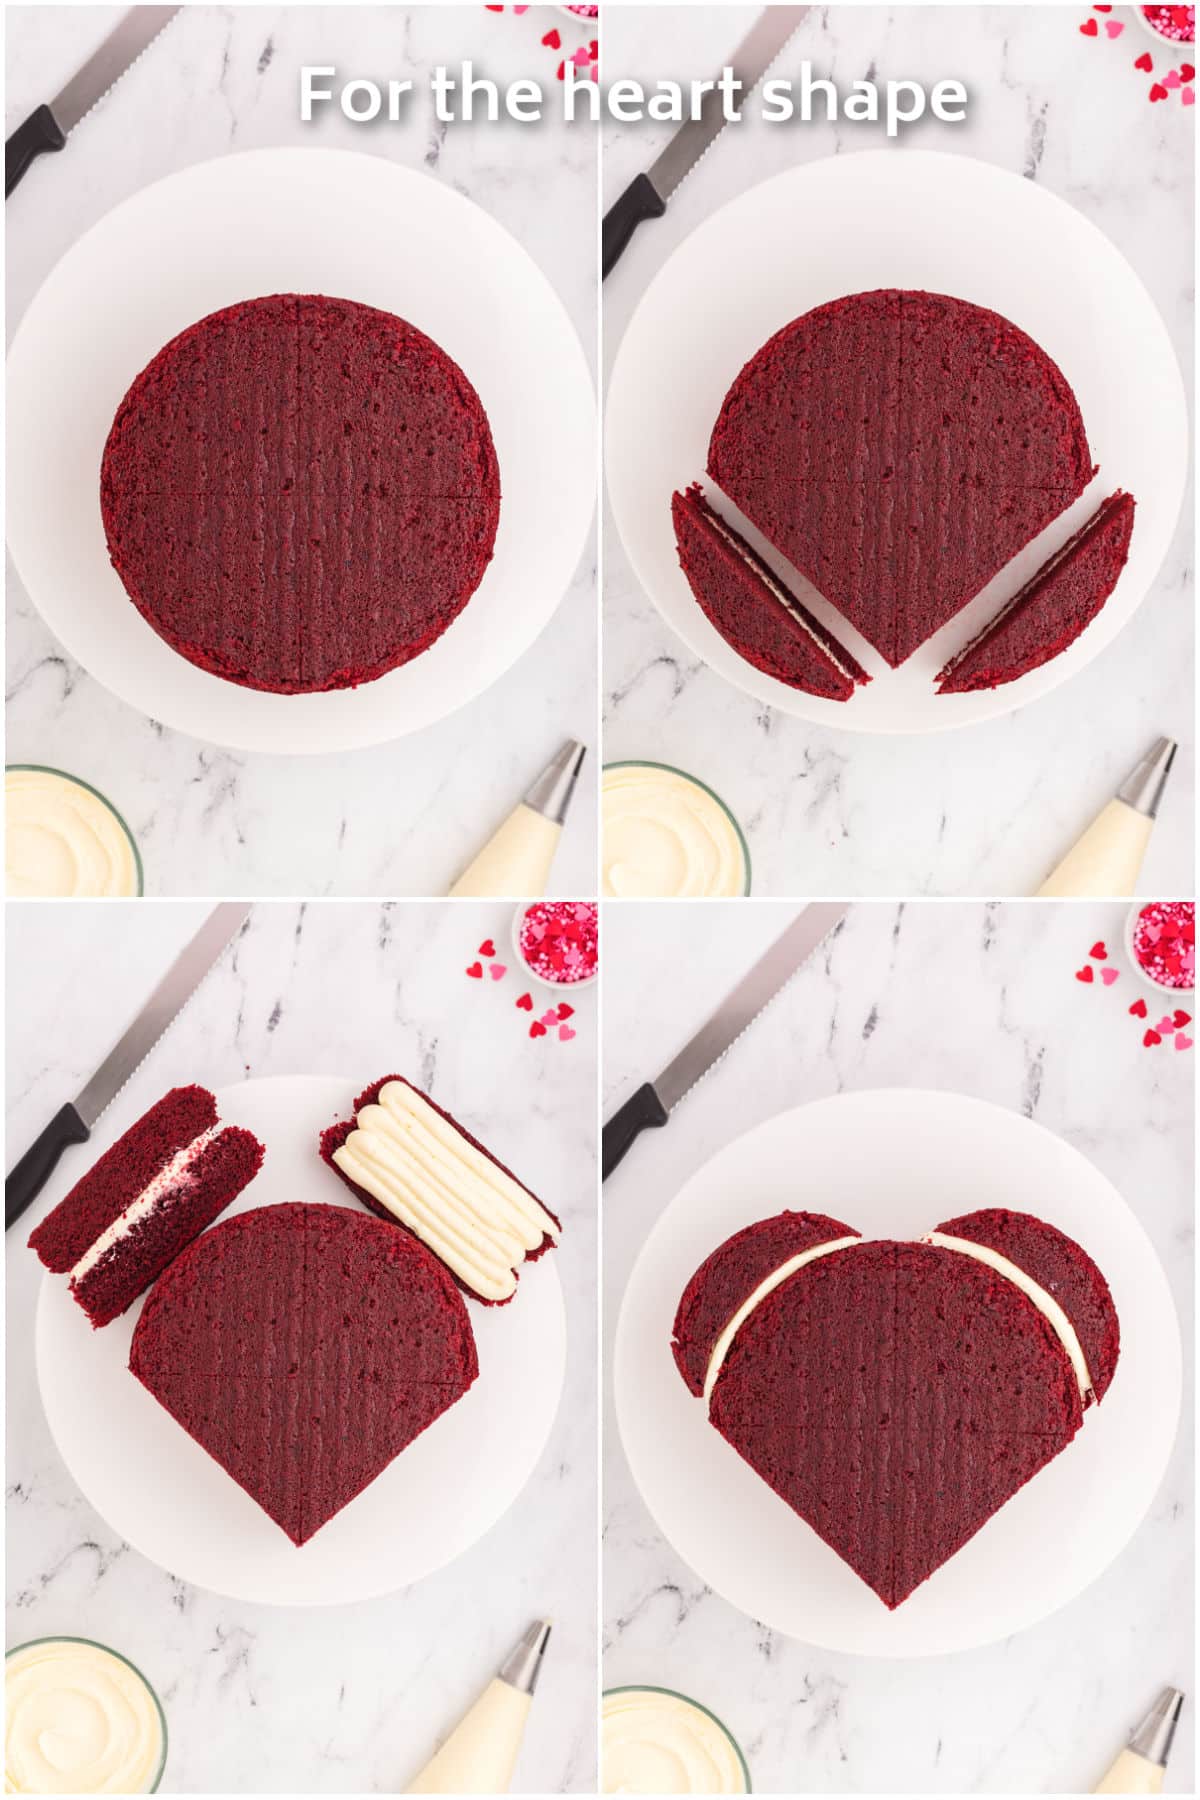 A round cake being cut into shapes and glued together with frosting to form a heart shape.